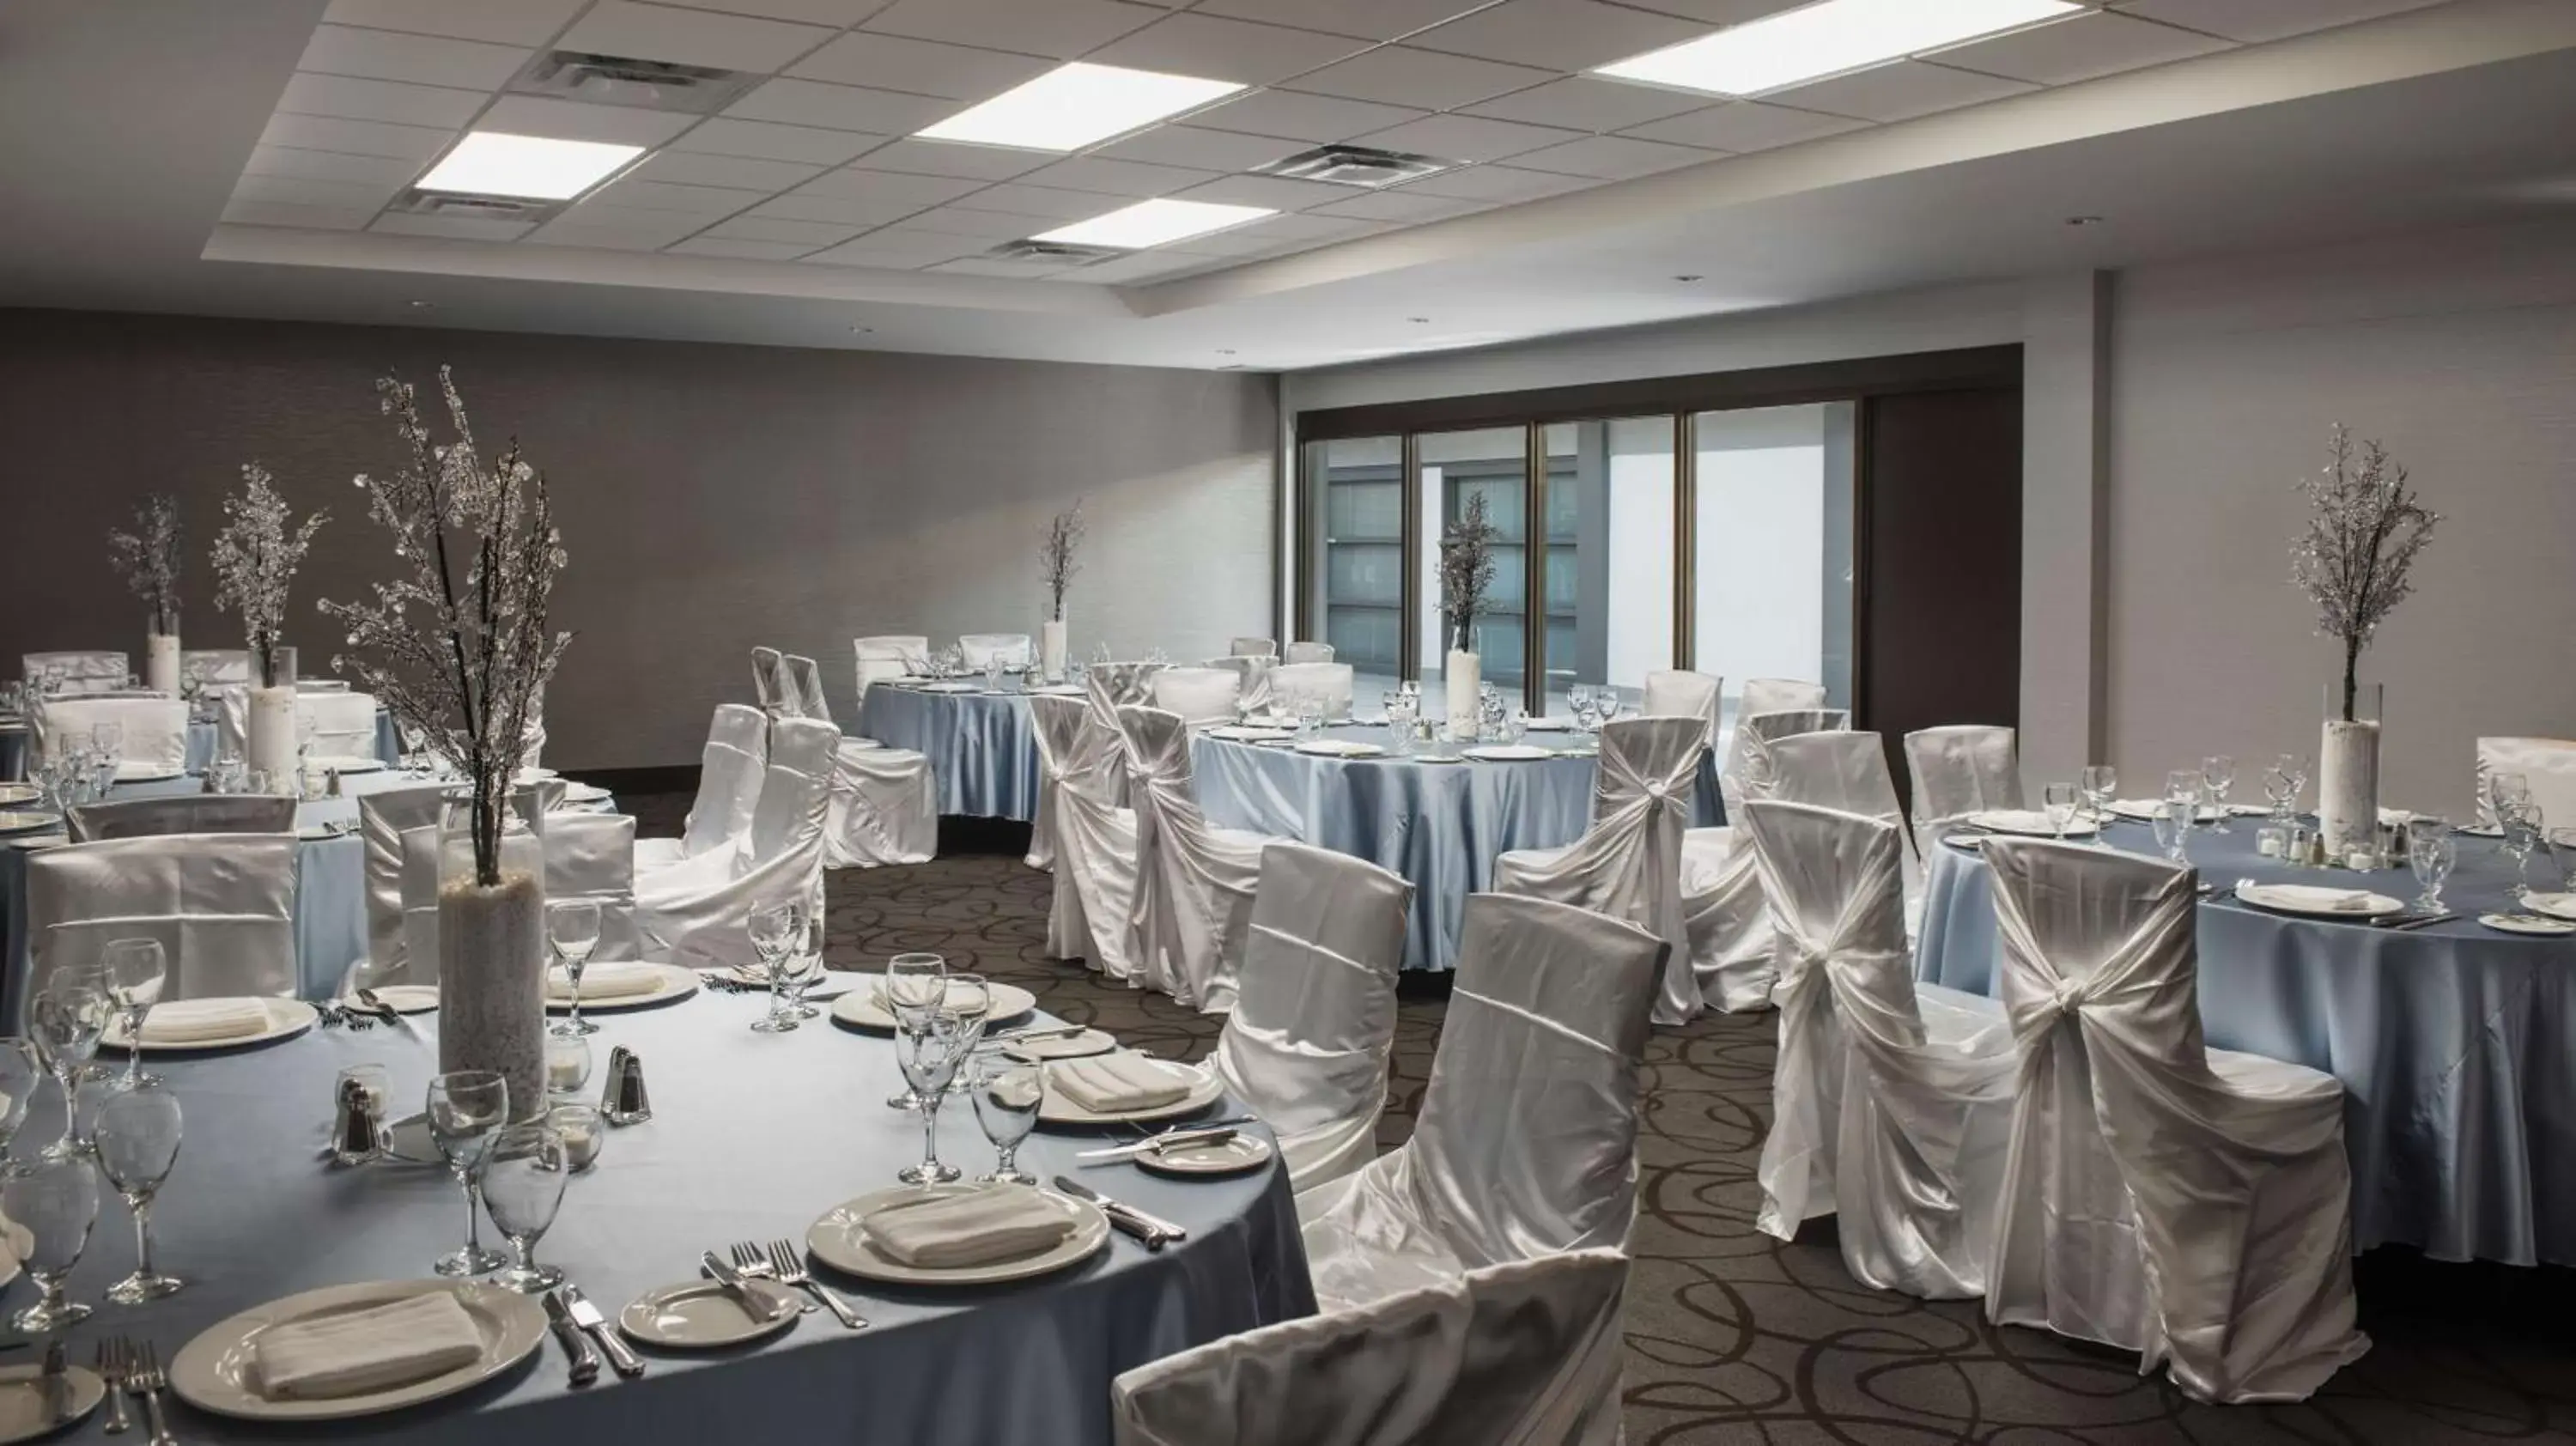 Meeting/conference room, Banquet Facilities in Hilton Winnipeg Airport Suites